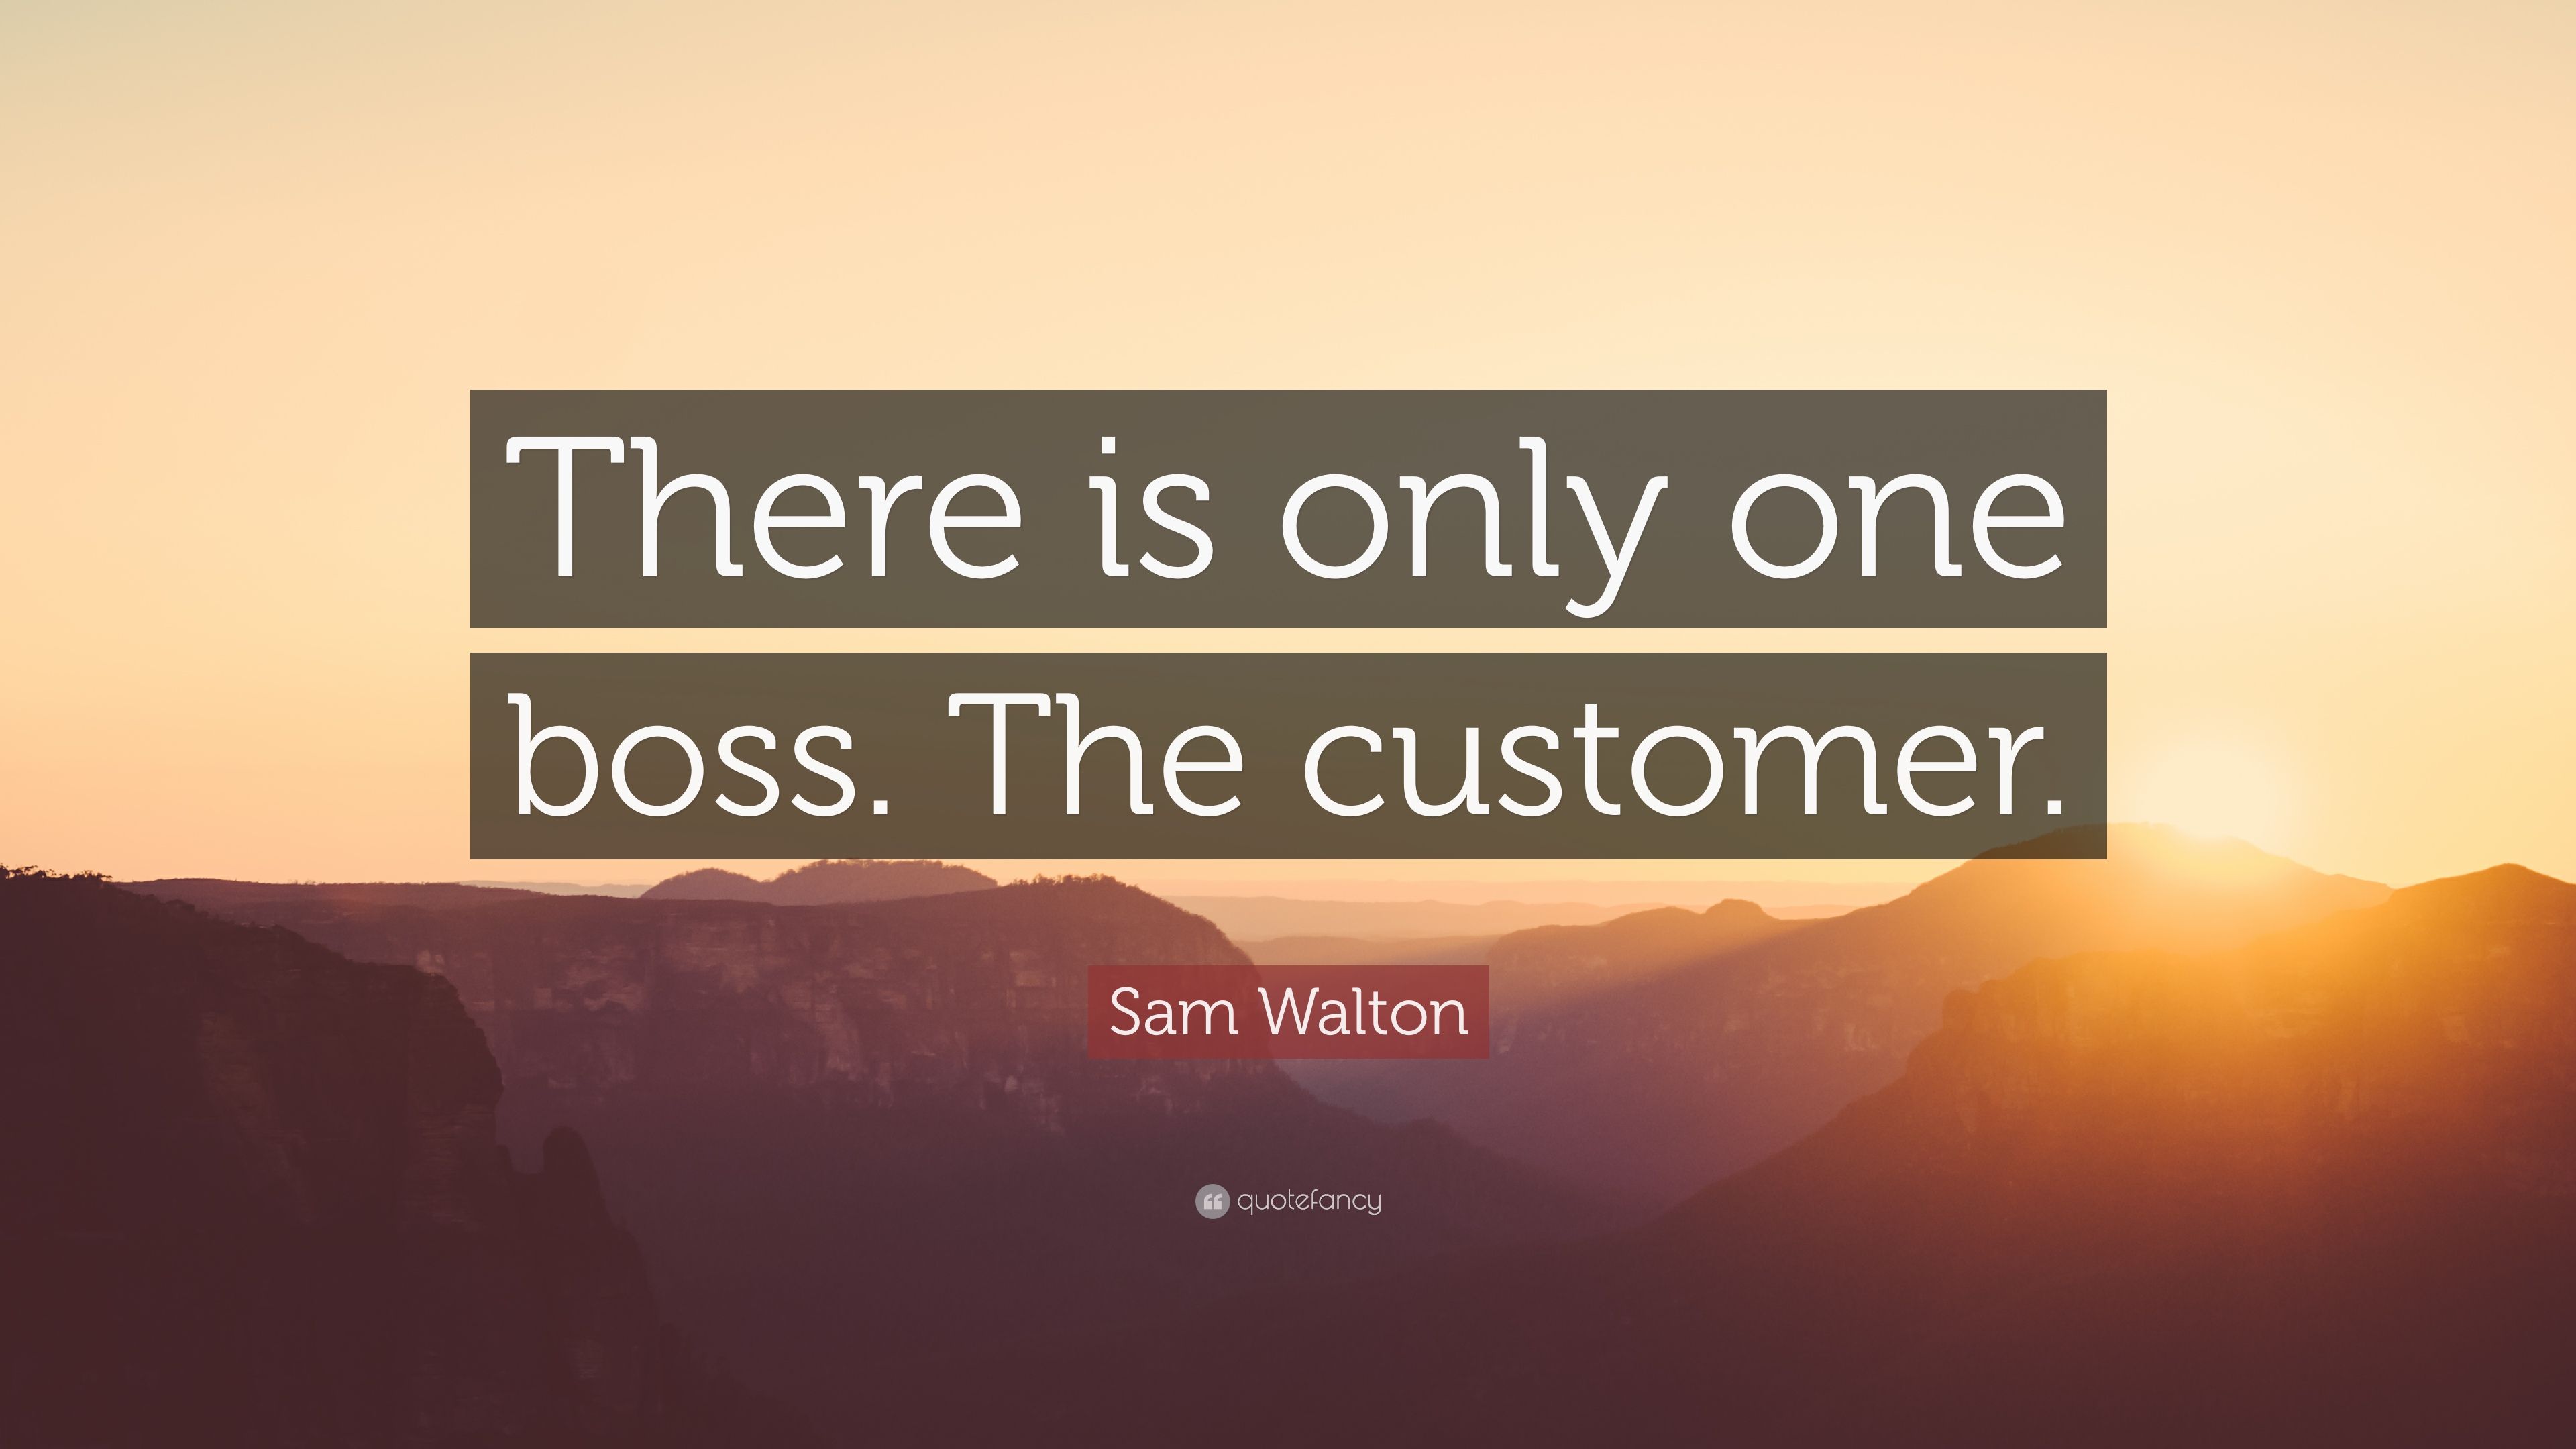 Sam Walton Quote: “There is only one boss. The customer.” 22